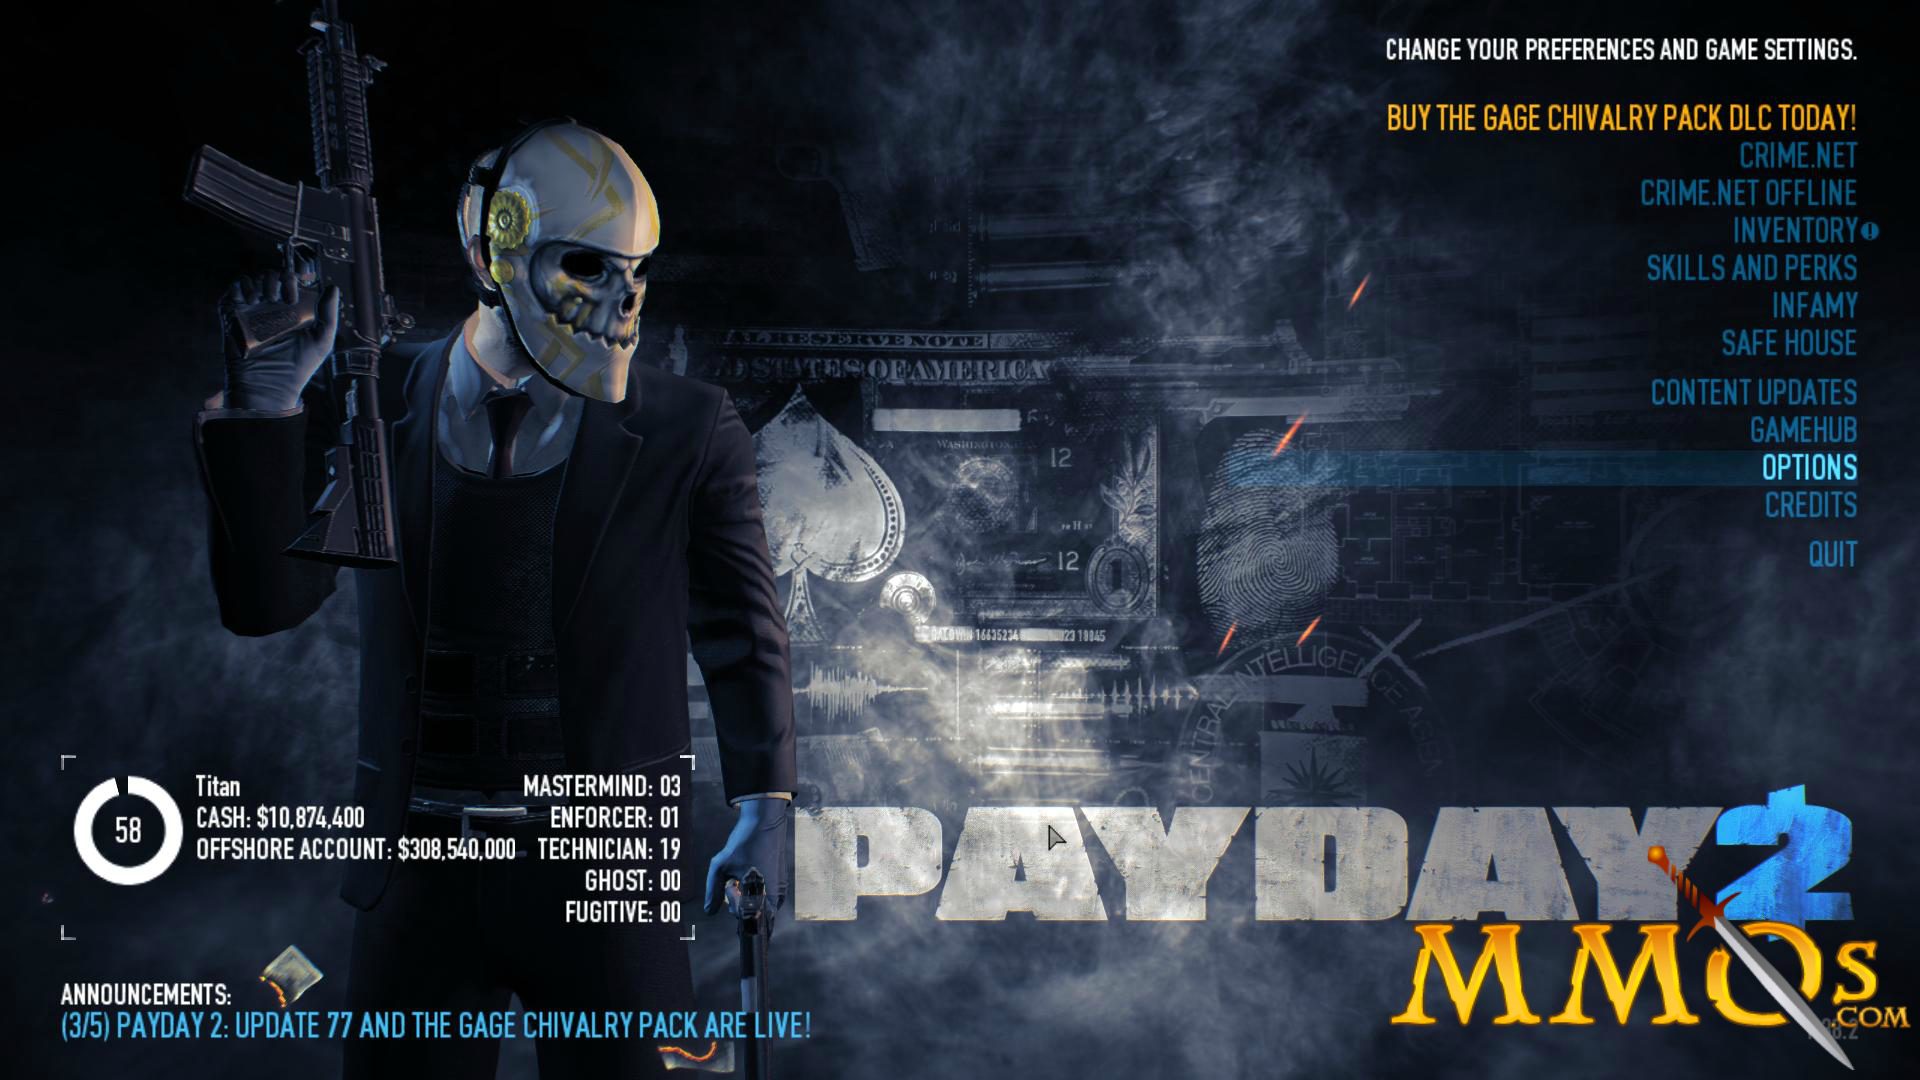 Infamy in payday 2 фото 85